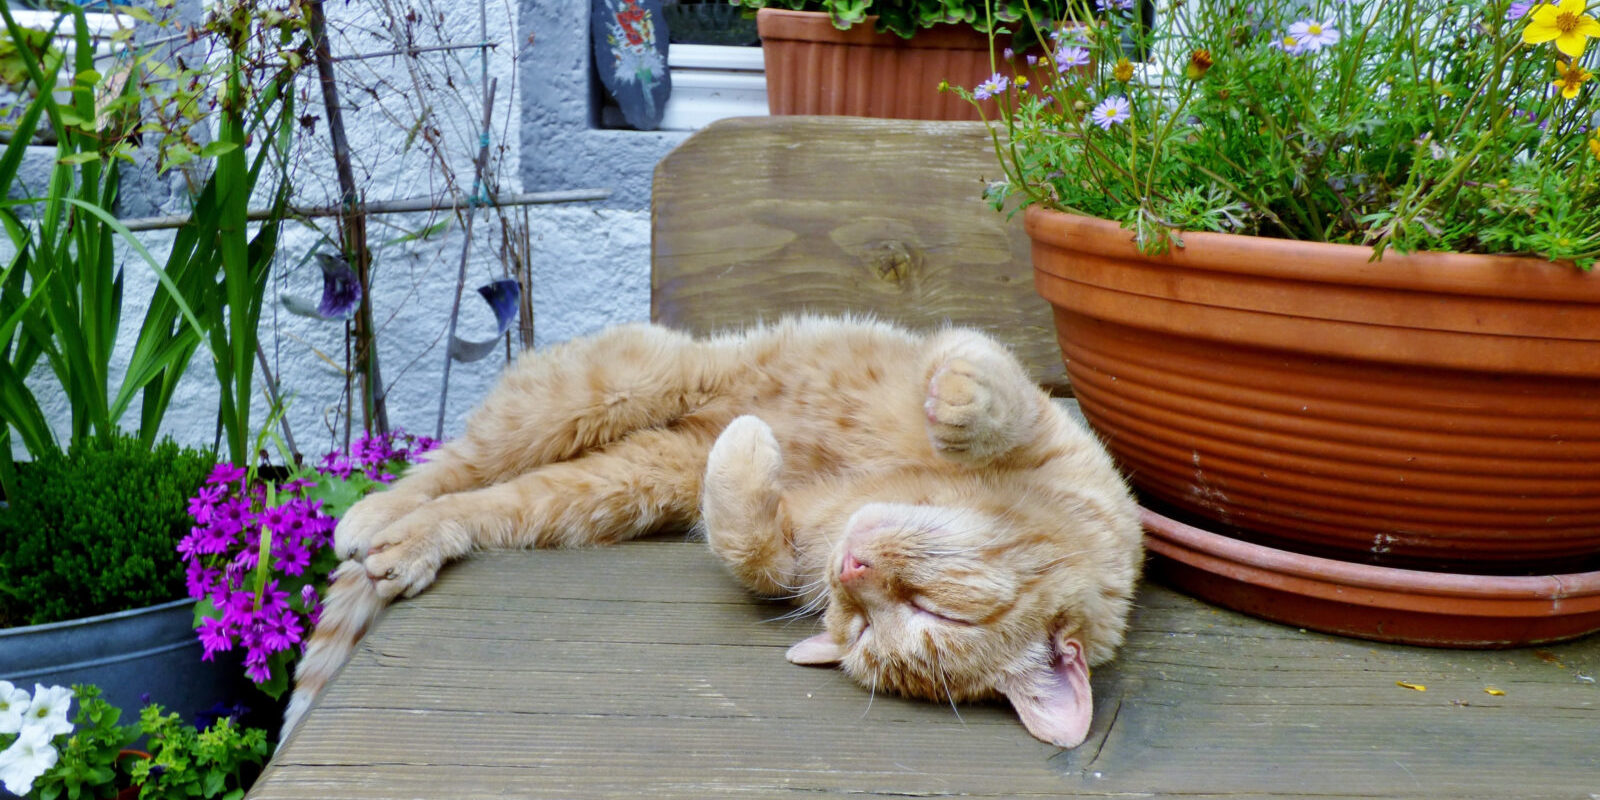 A light orange tabby rests on a wooden table, flanked by wildflowers in terra cotta pots and tin tubs. His eyes are closed, as though he's getting the rest he really needs.